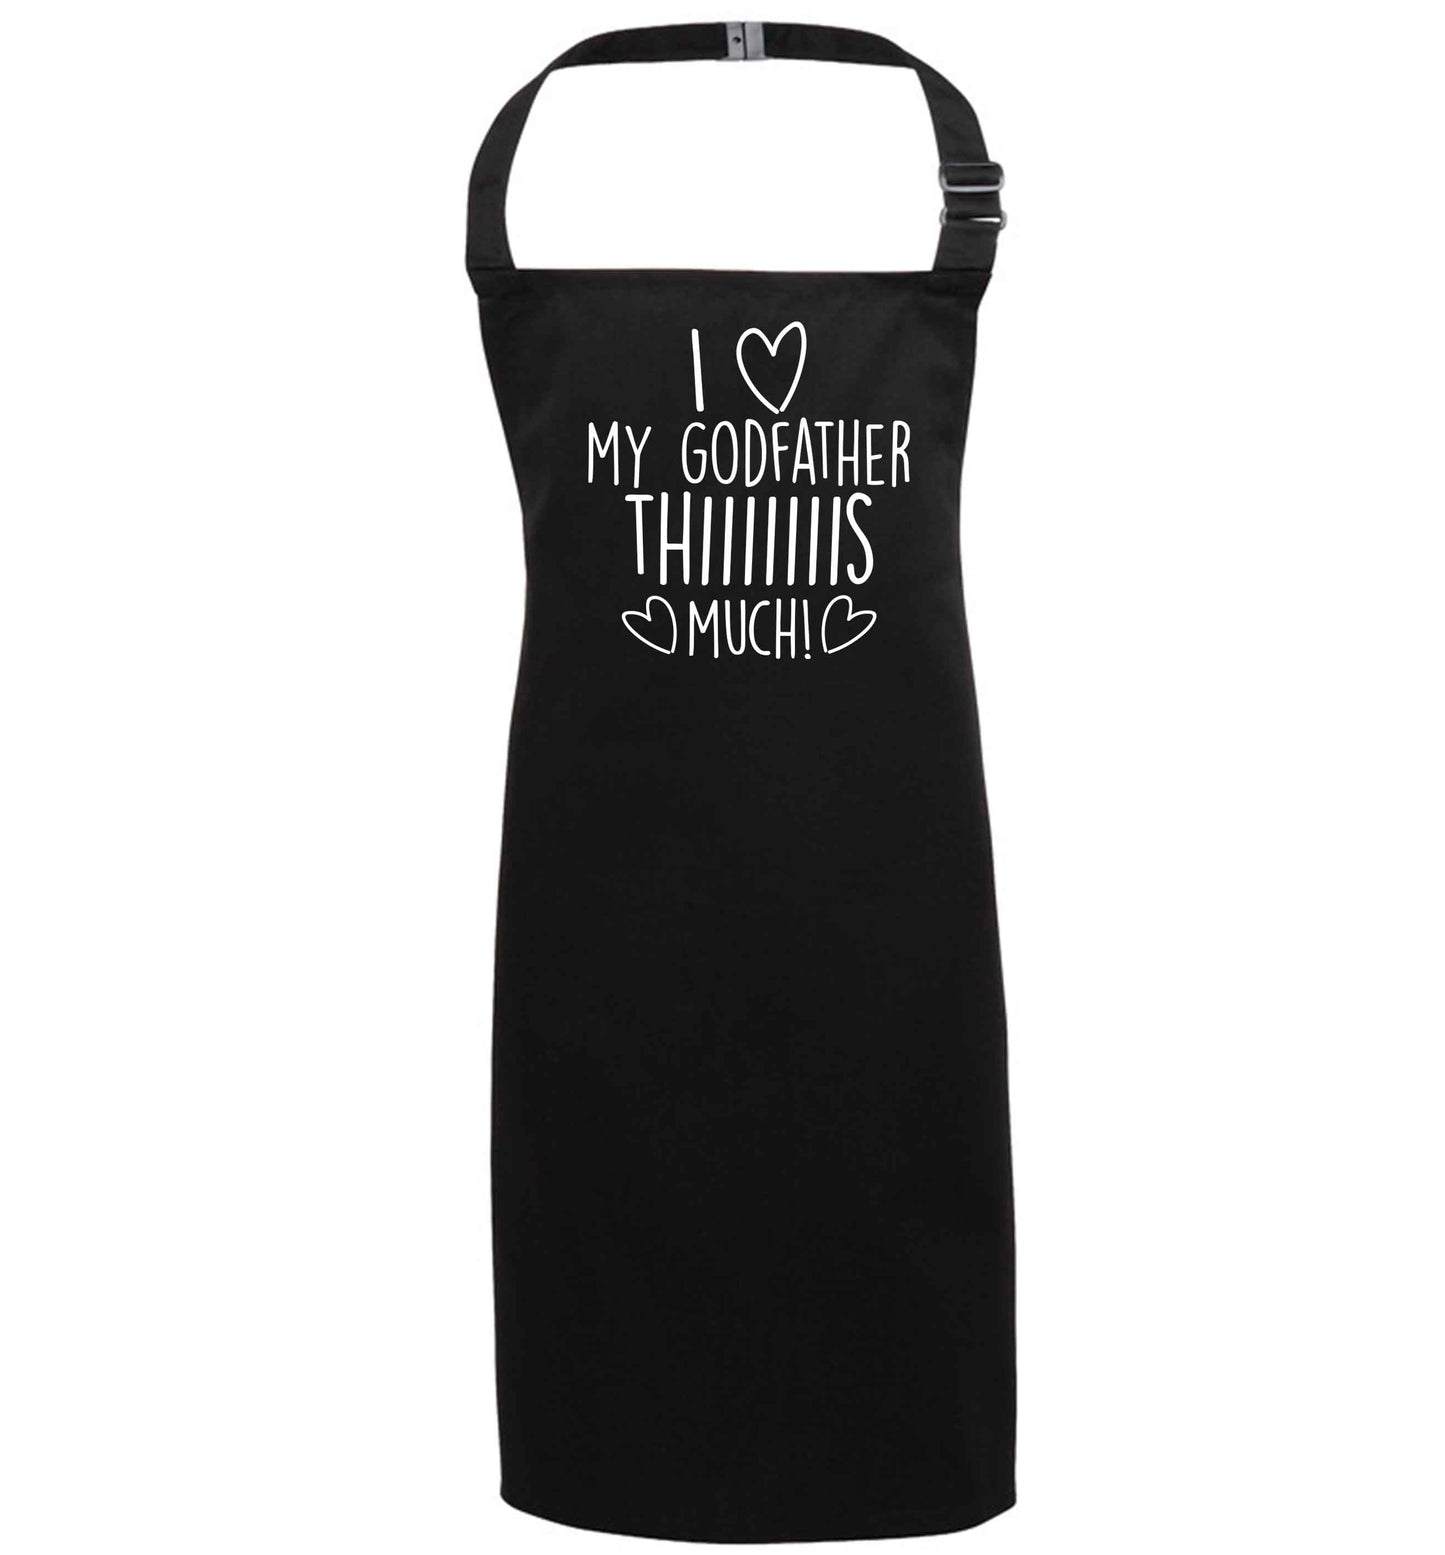 I love my Godfather this much black apron 7-10 years